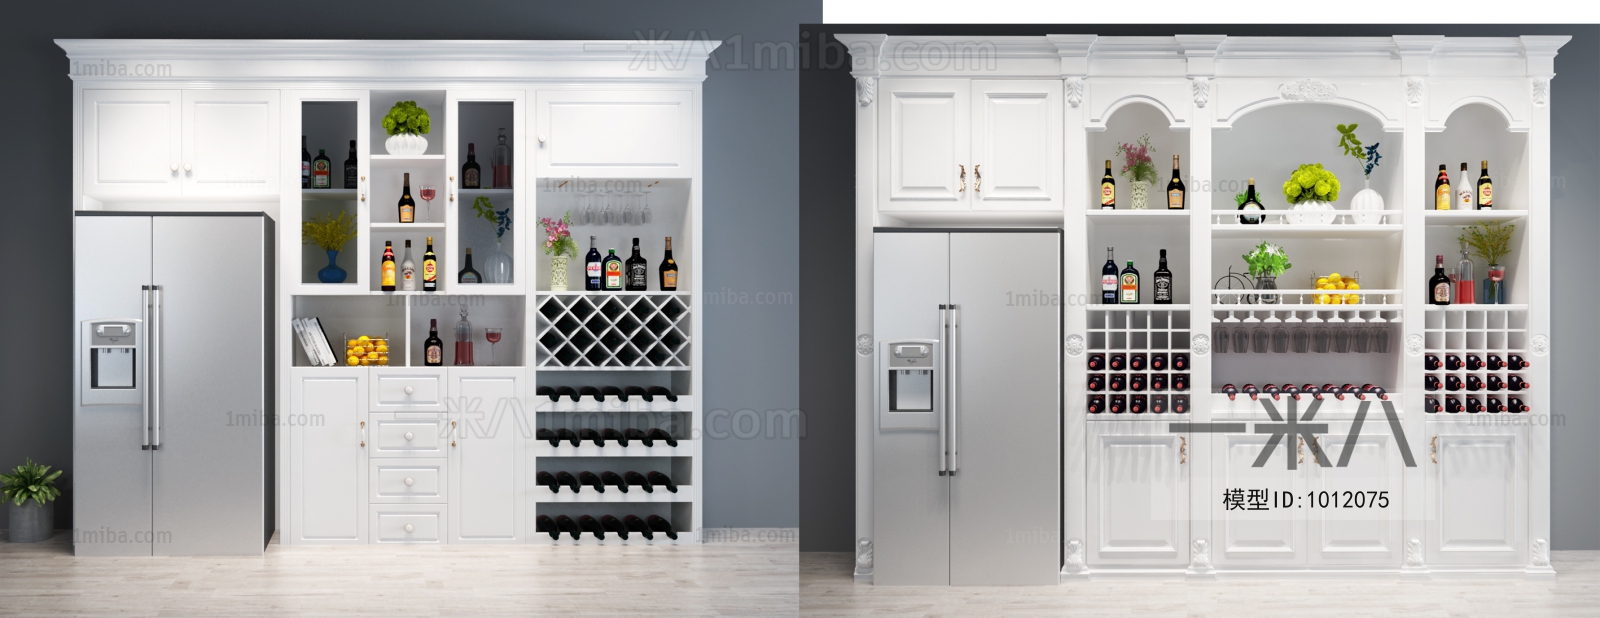 Simple European Style Home Appliance Refrigerator